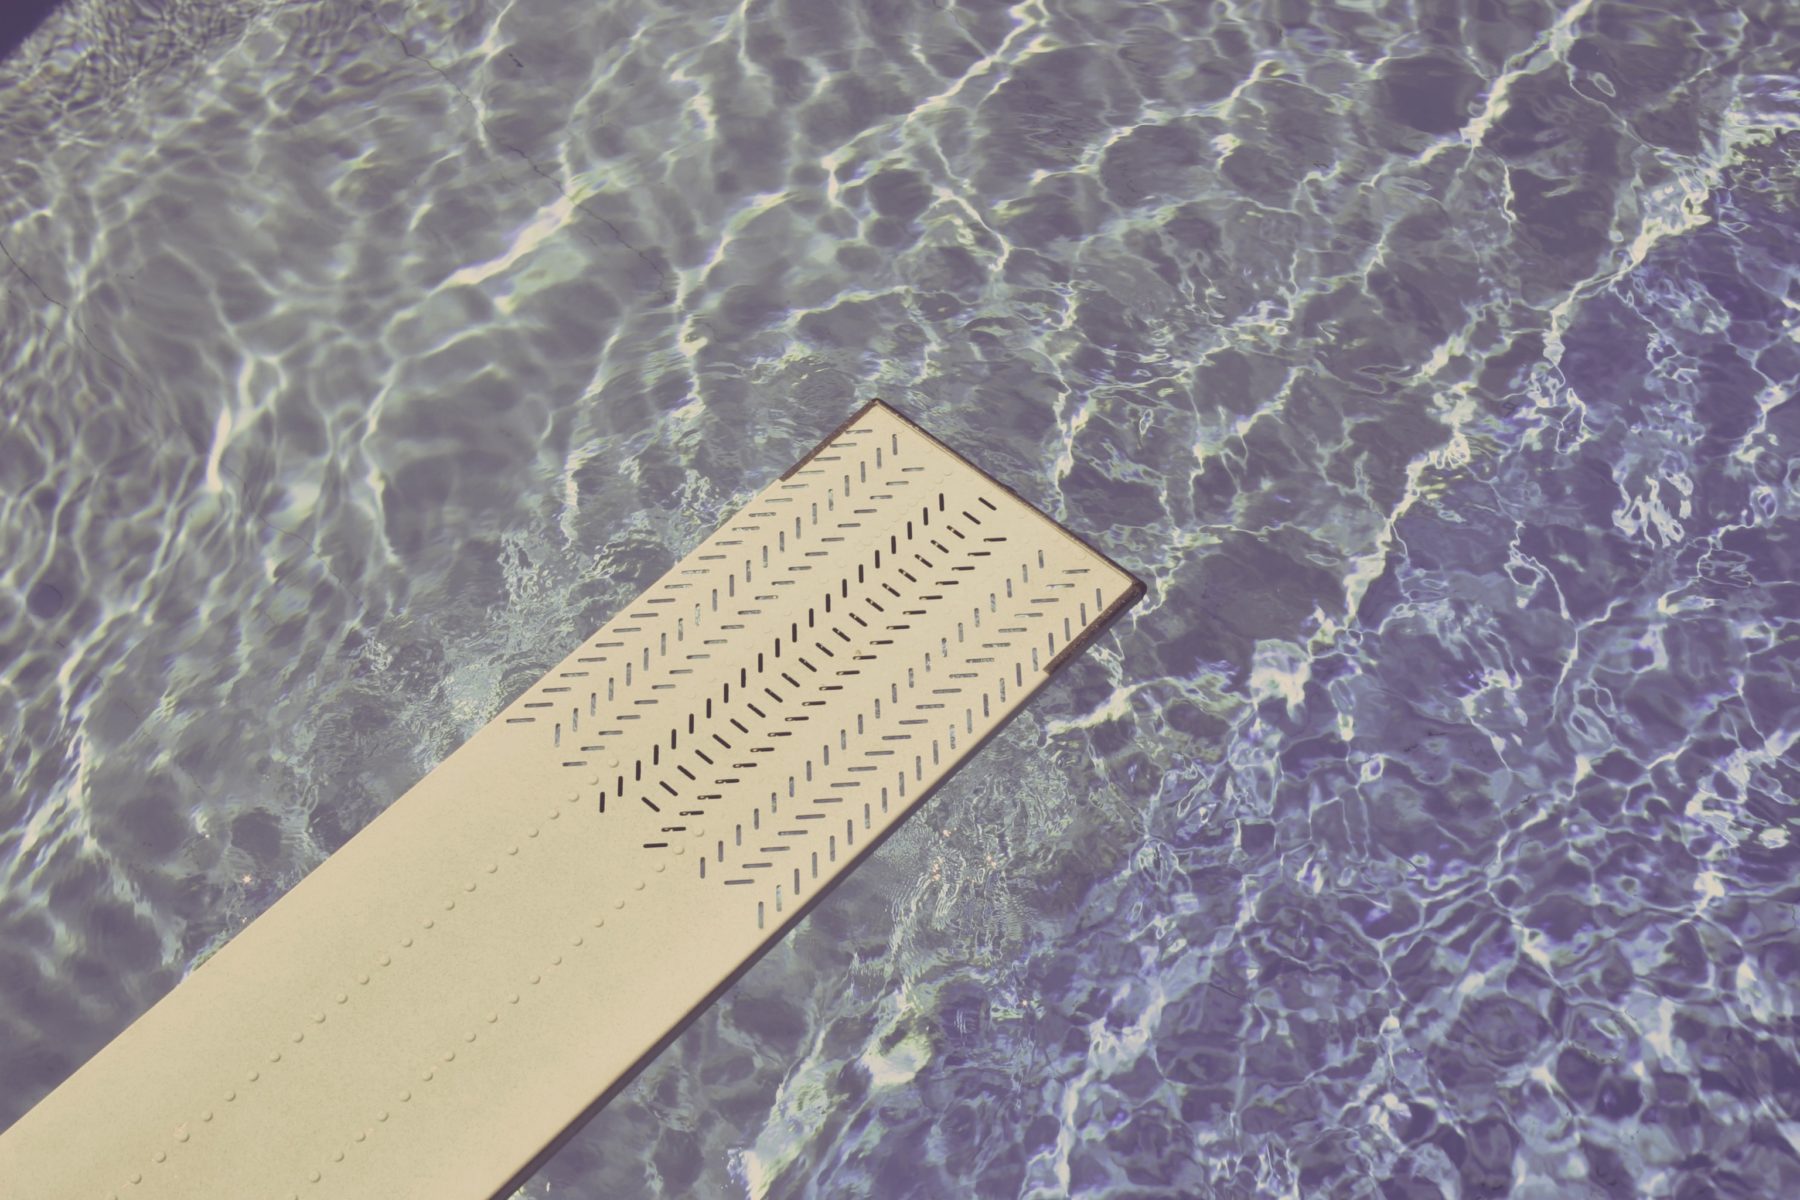 A diving board over a swimming pool.